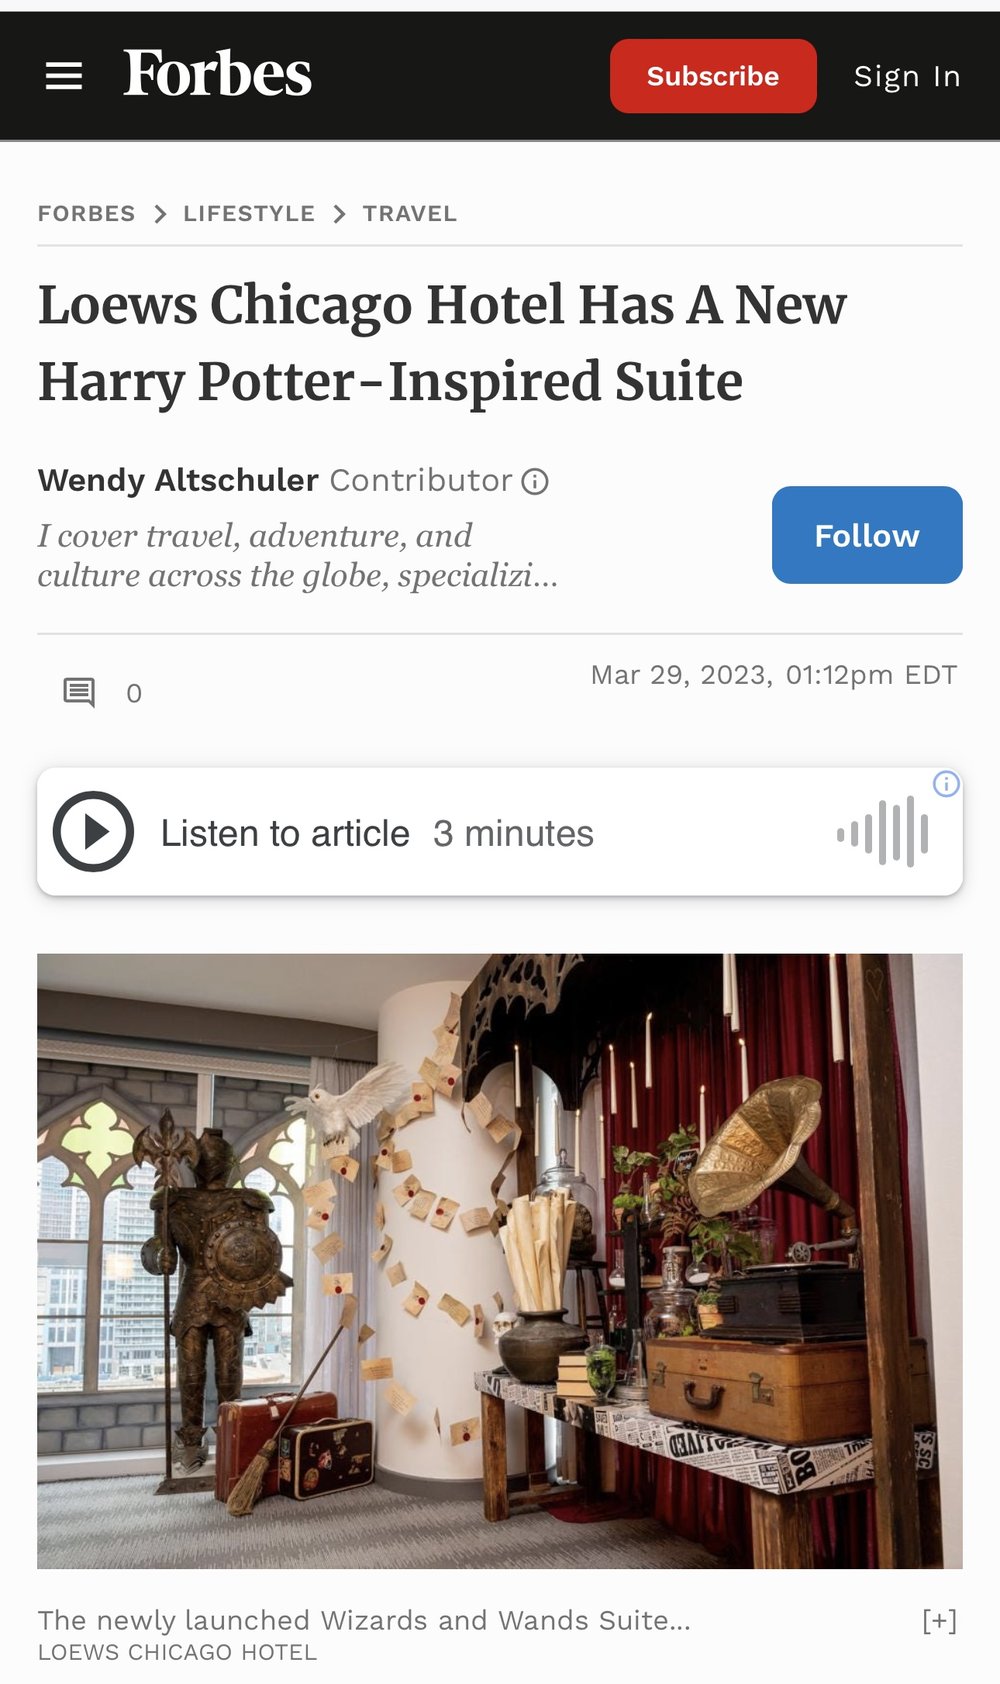 Loews Chicago Hotel Has a New Harry Potter-Inspired Suite